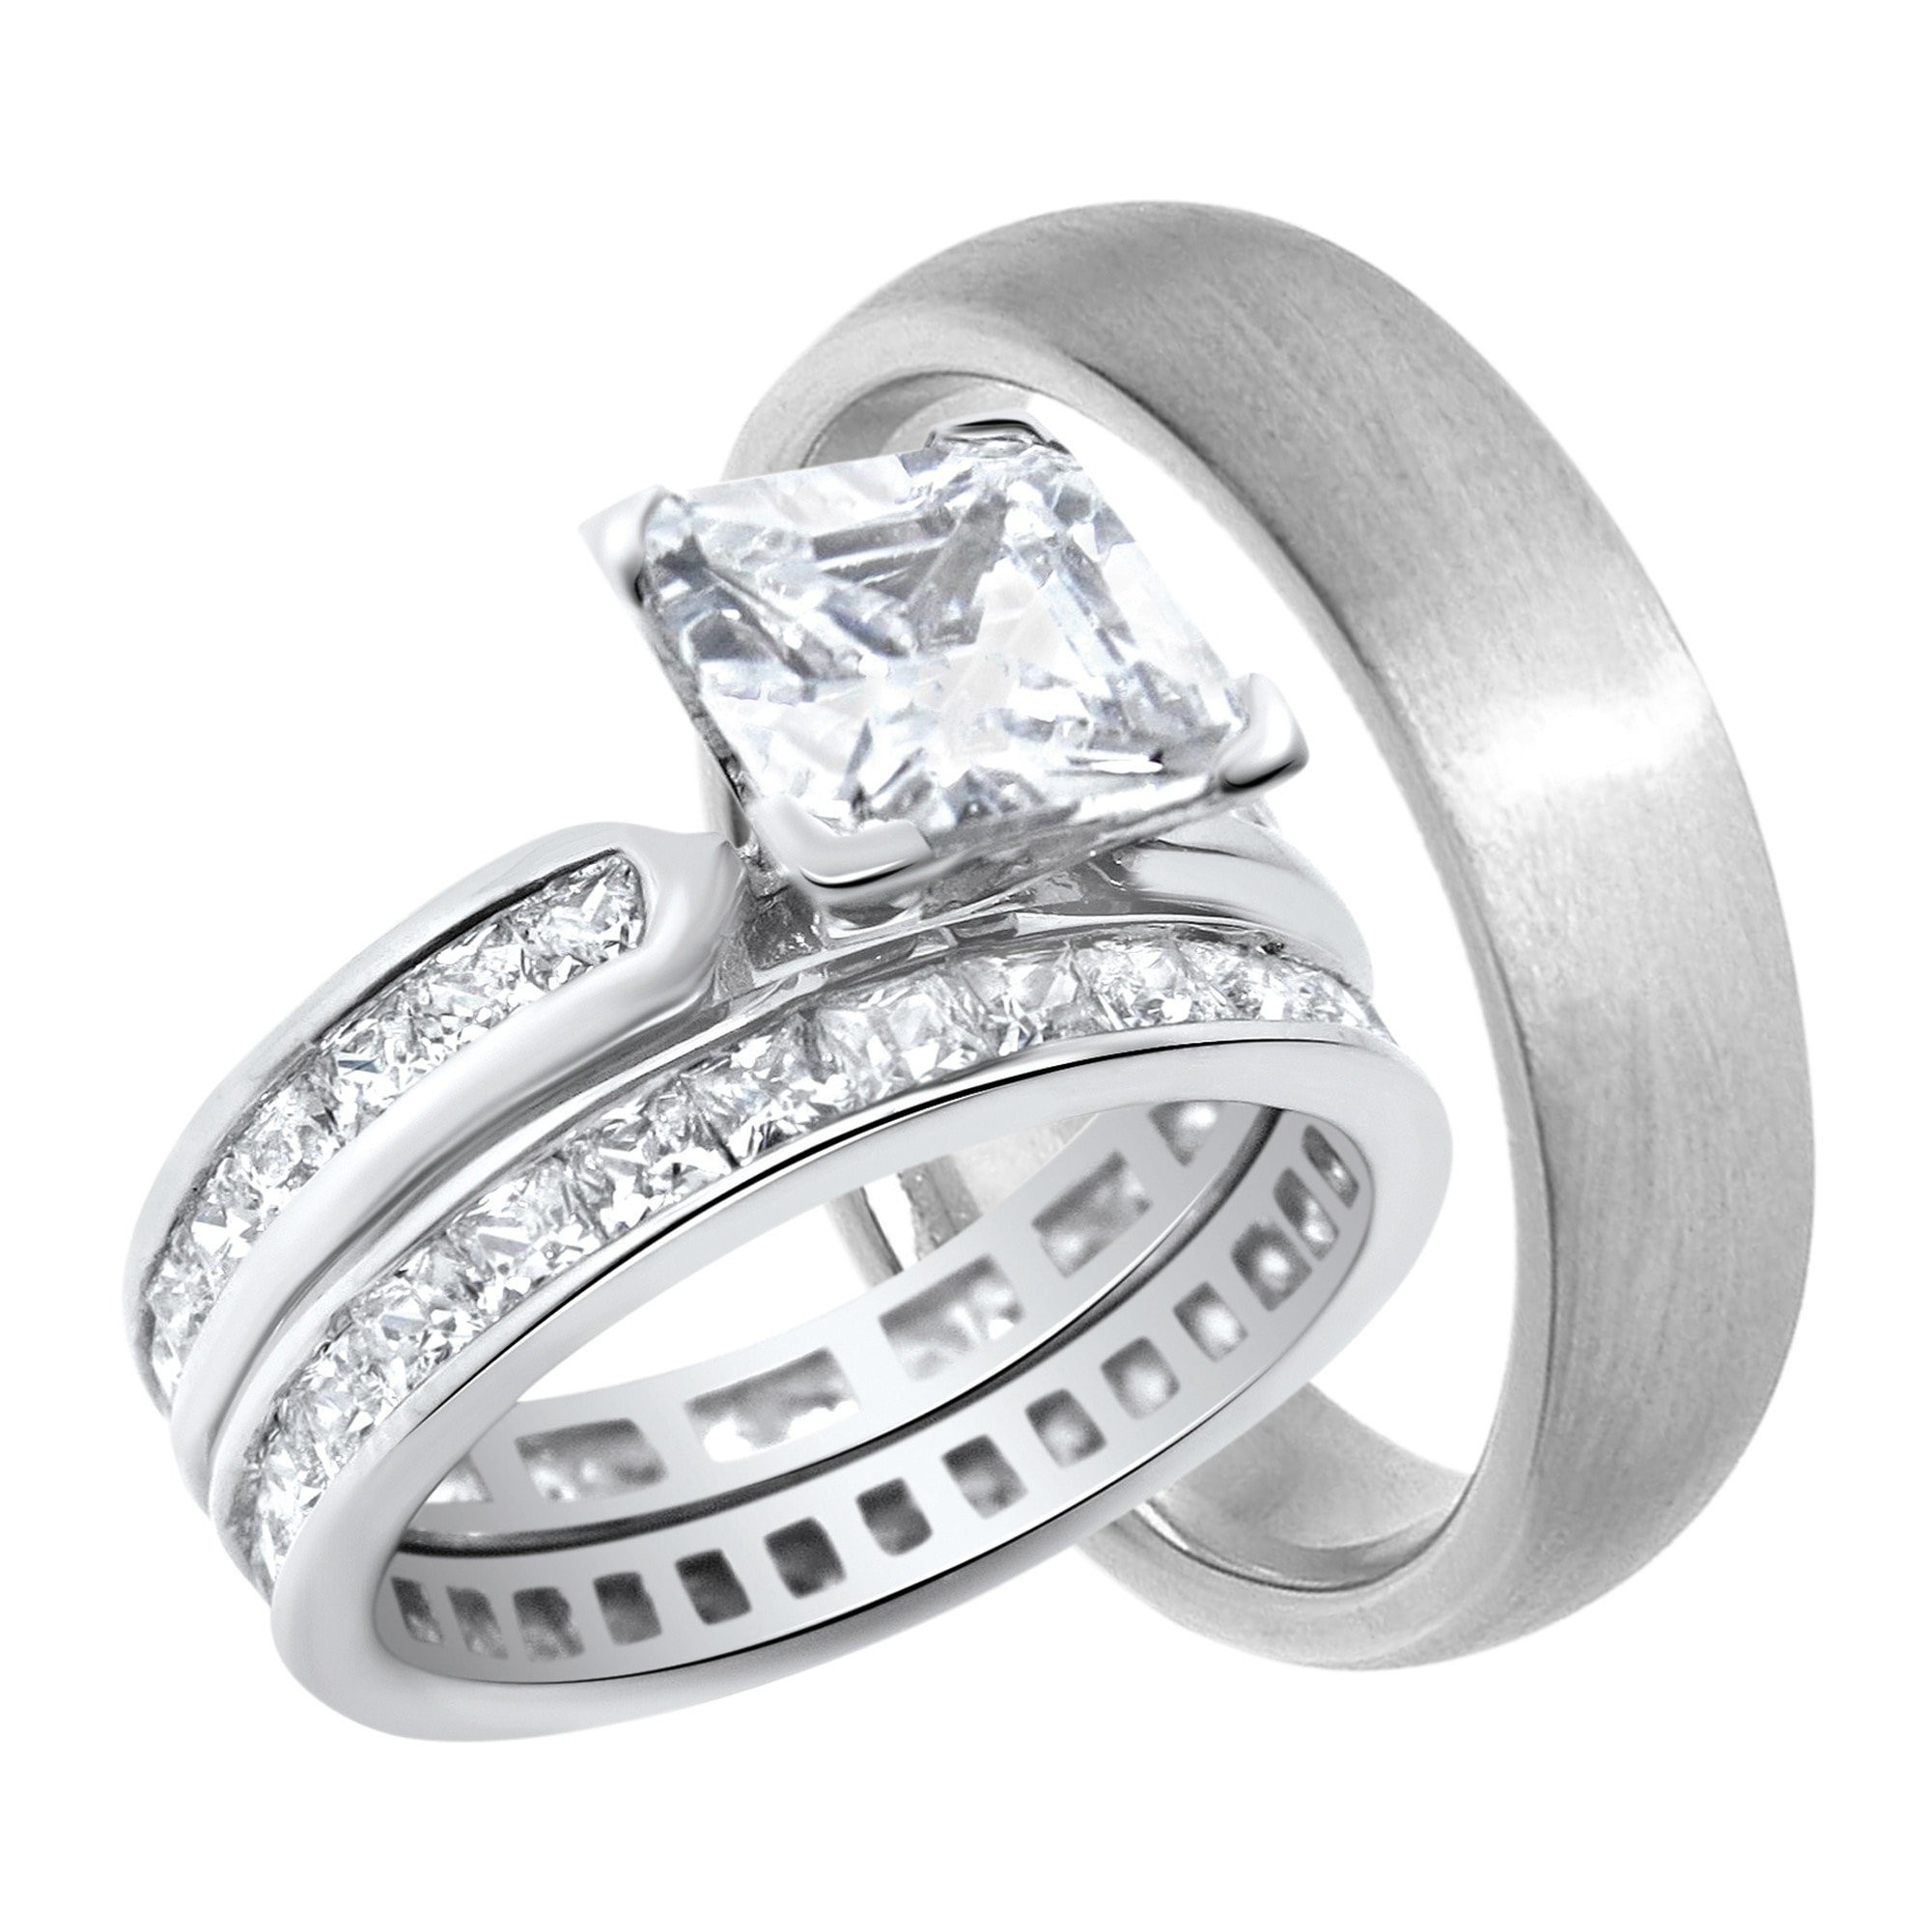 Cheap Wedding Rings For Him
 His Hers Wedding Rings Set Cheap Matching Rings for Him